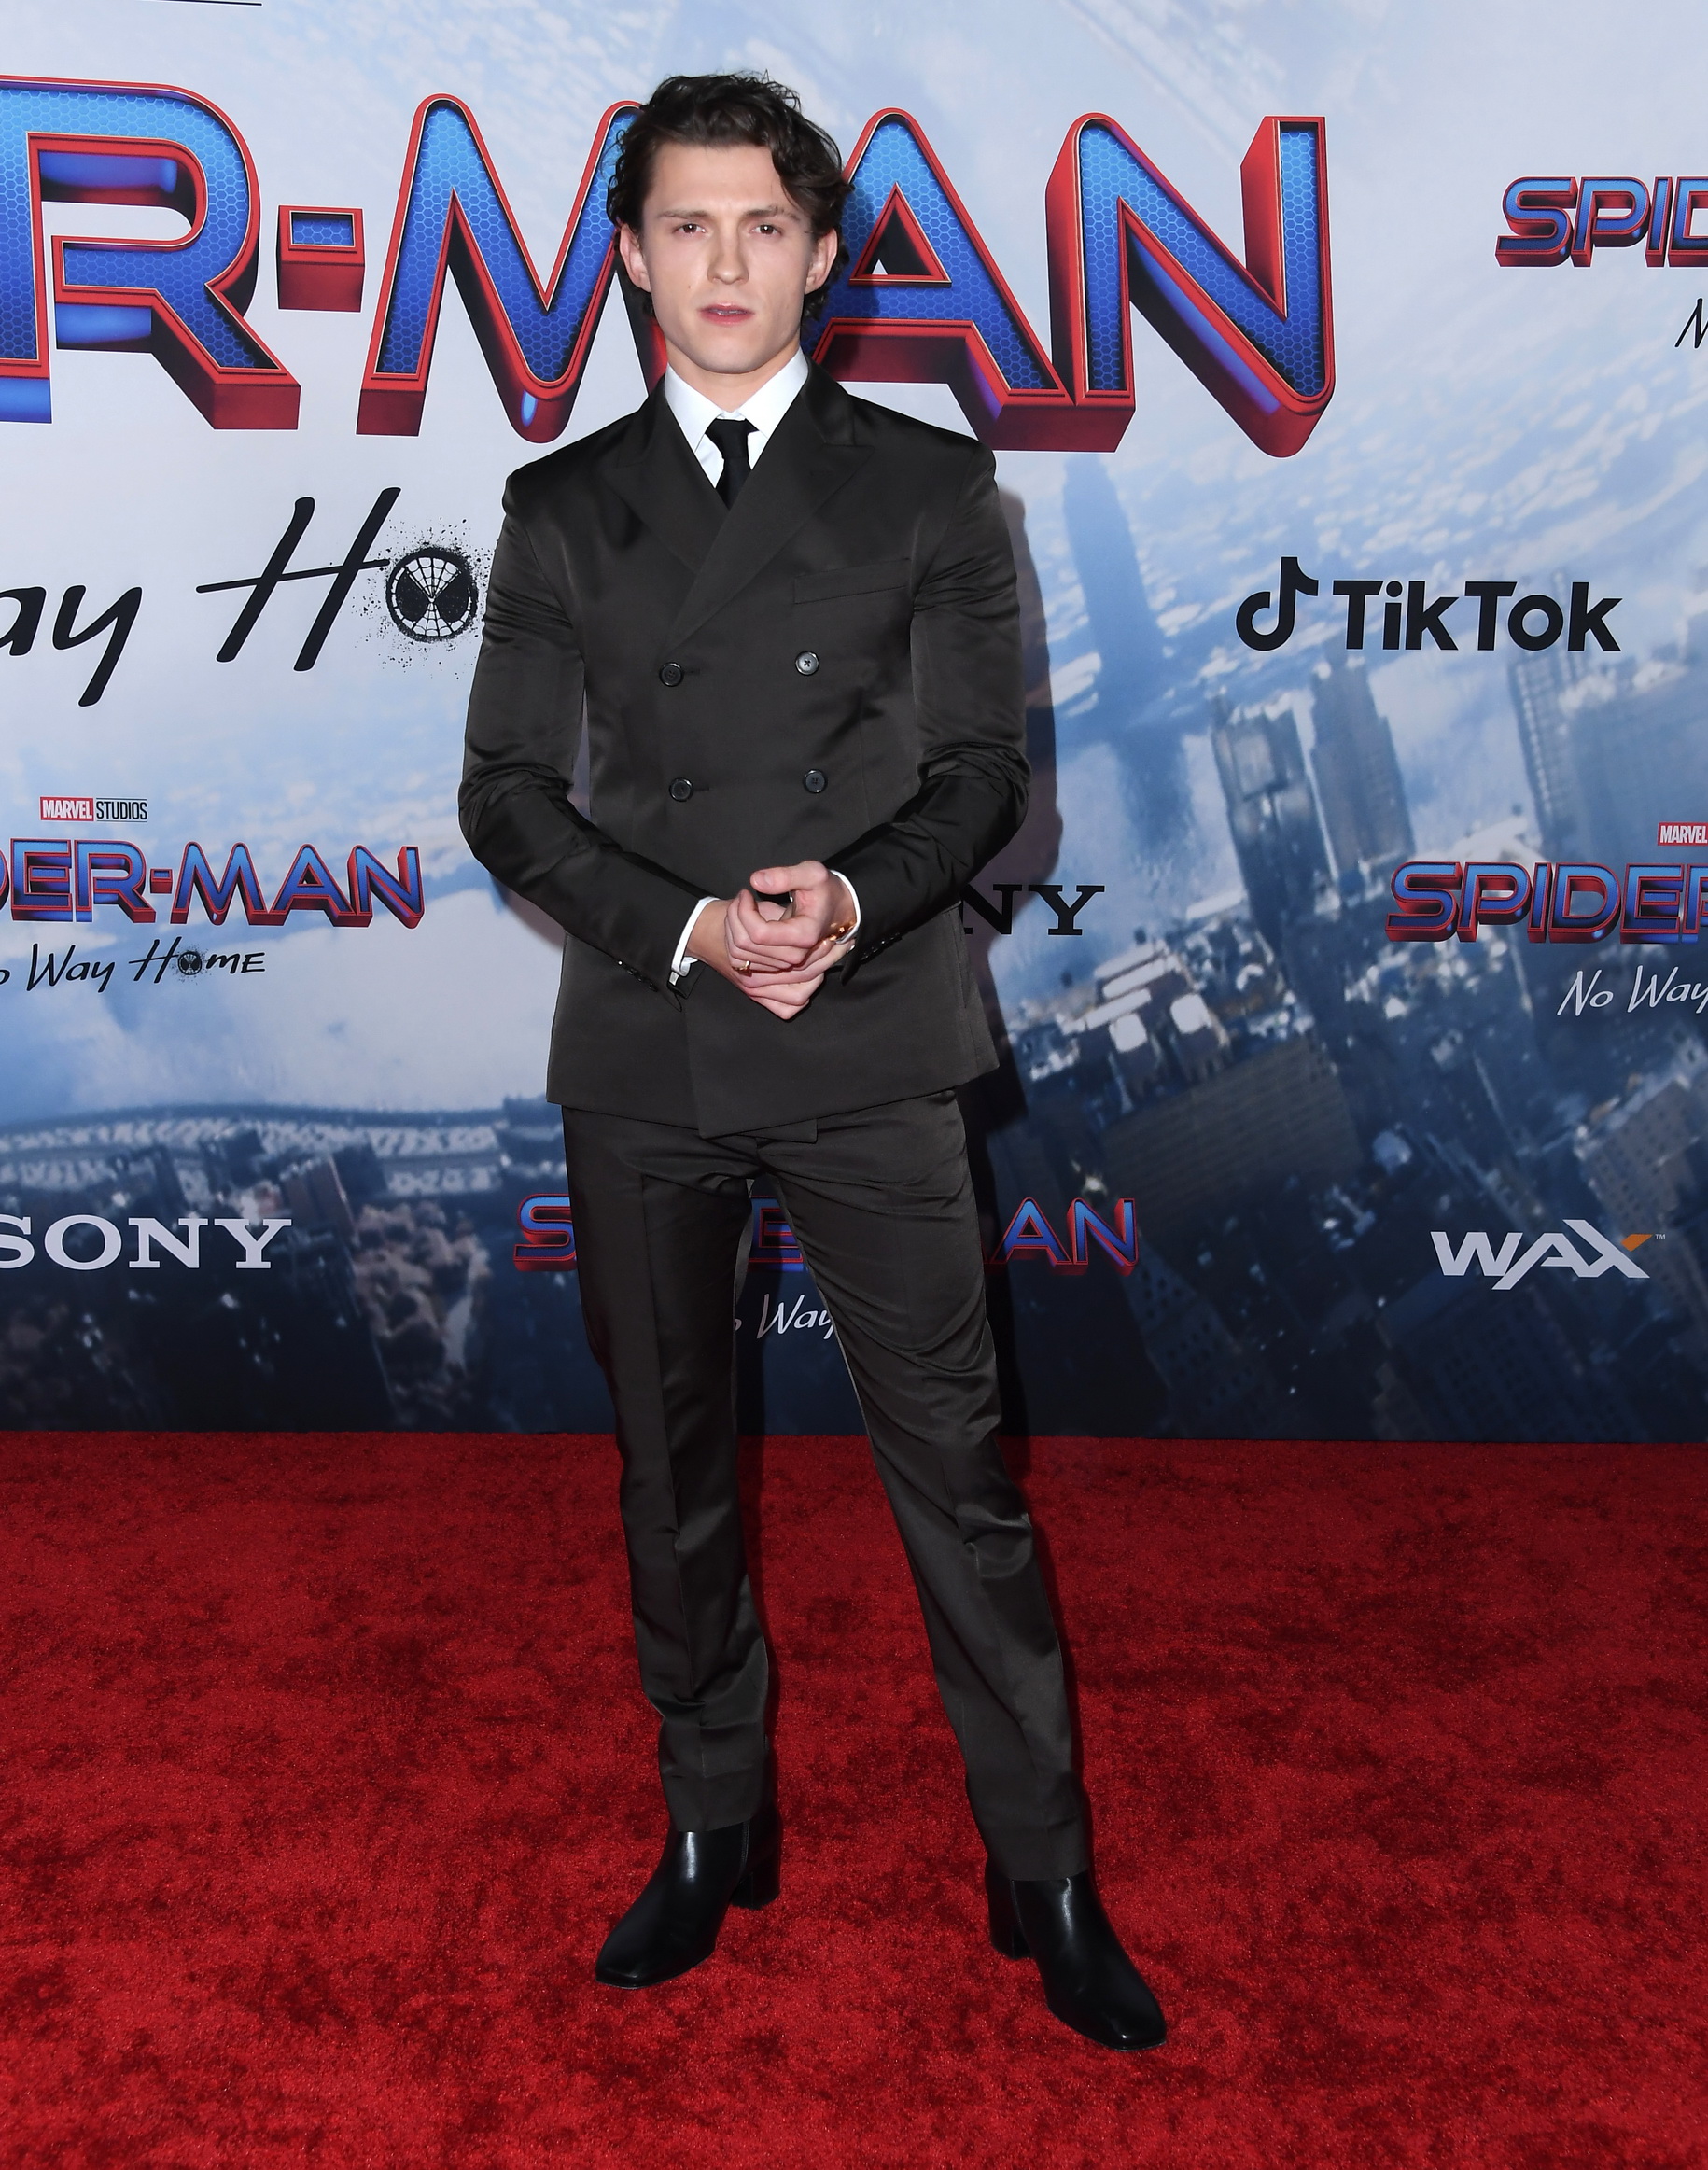 tom-holland-wore-custom-prada-suit-the-spider-man-no-way-home-premiere-in-los-angeles